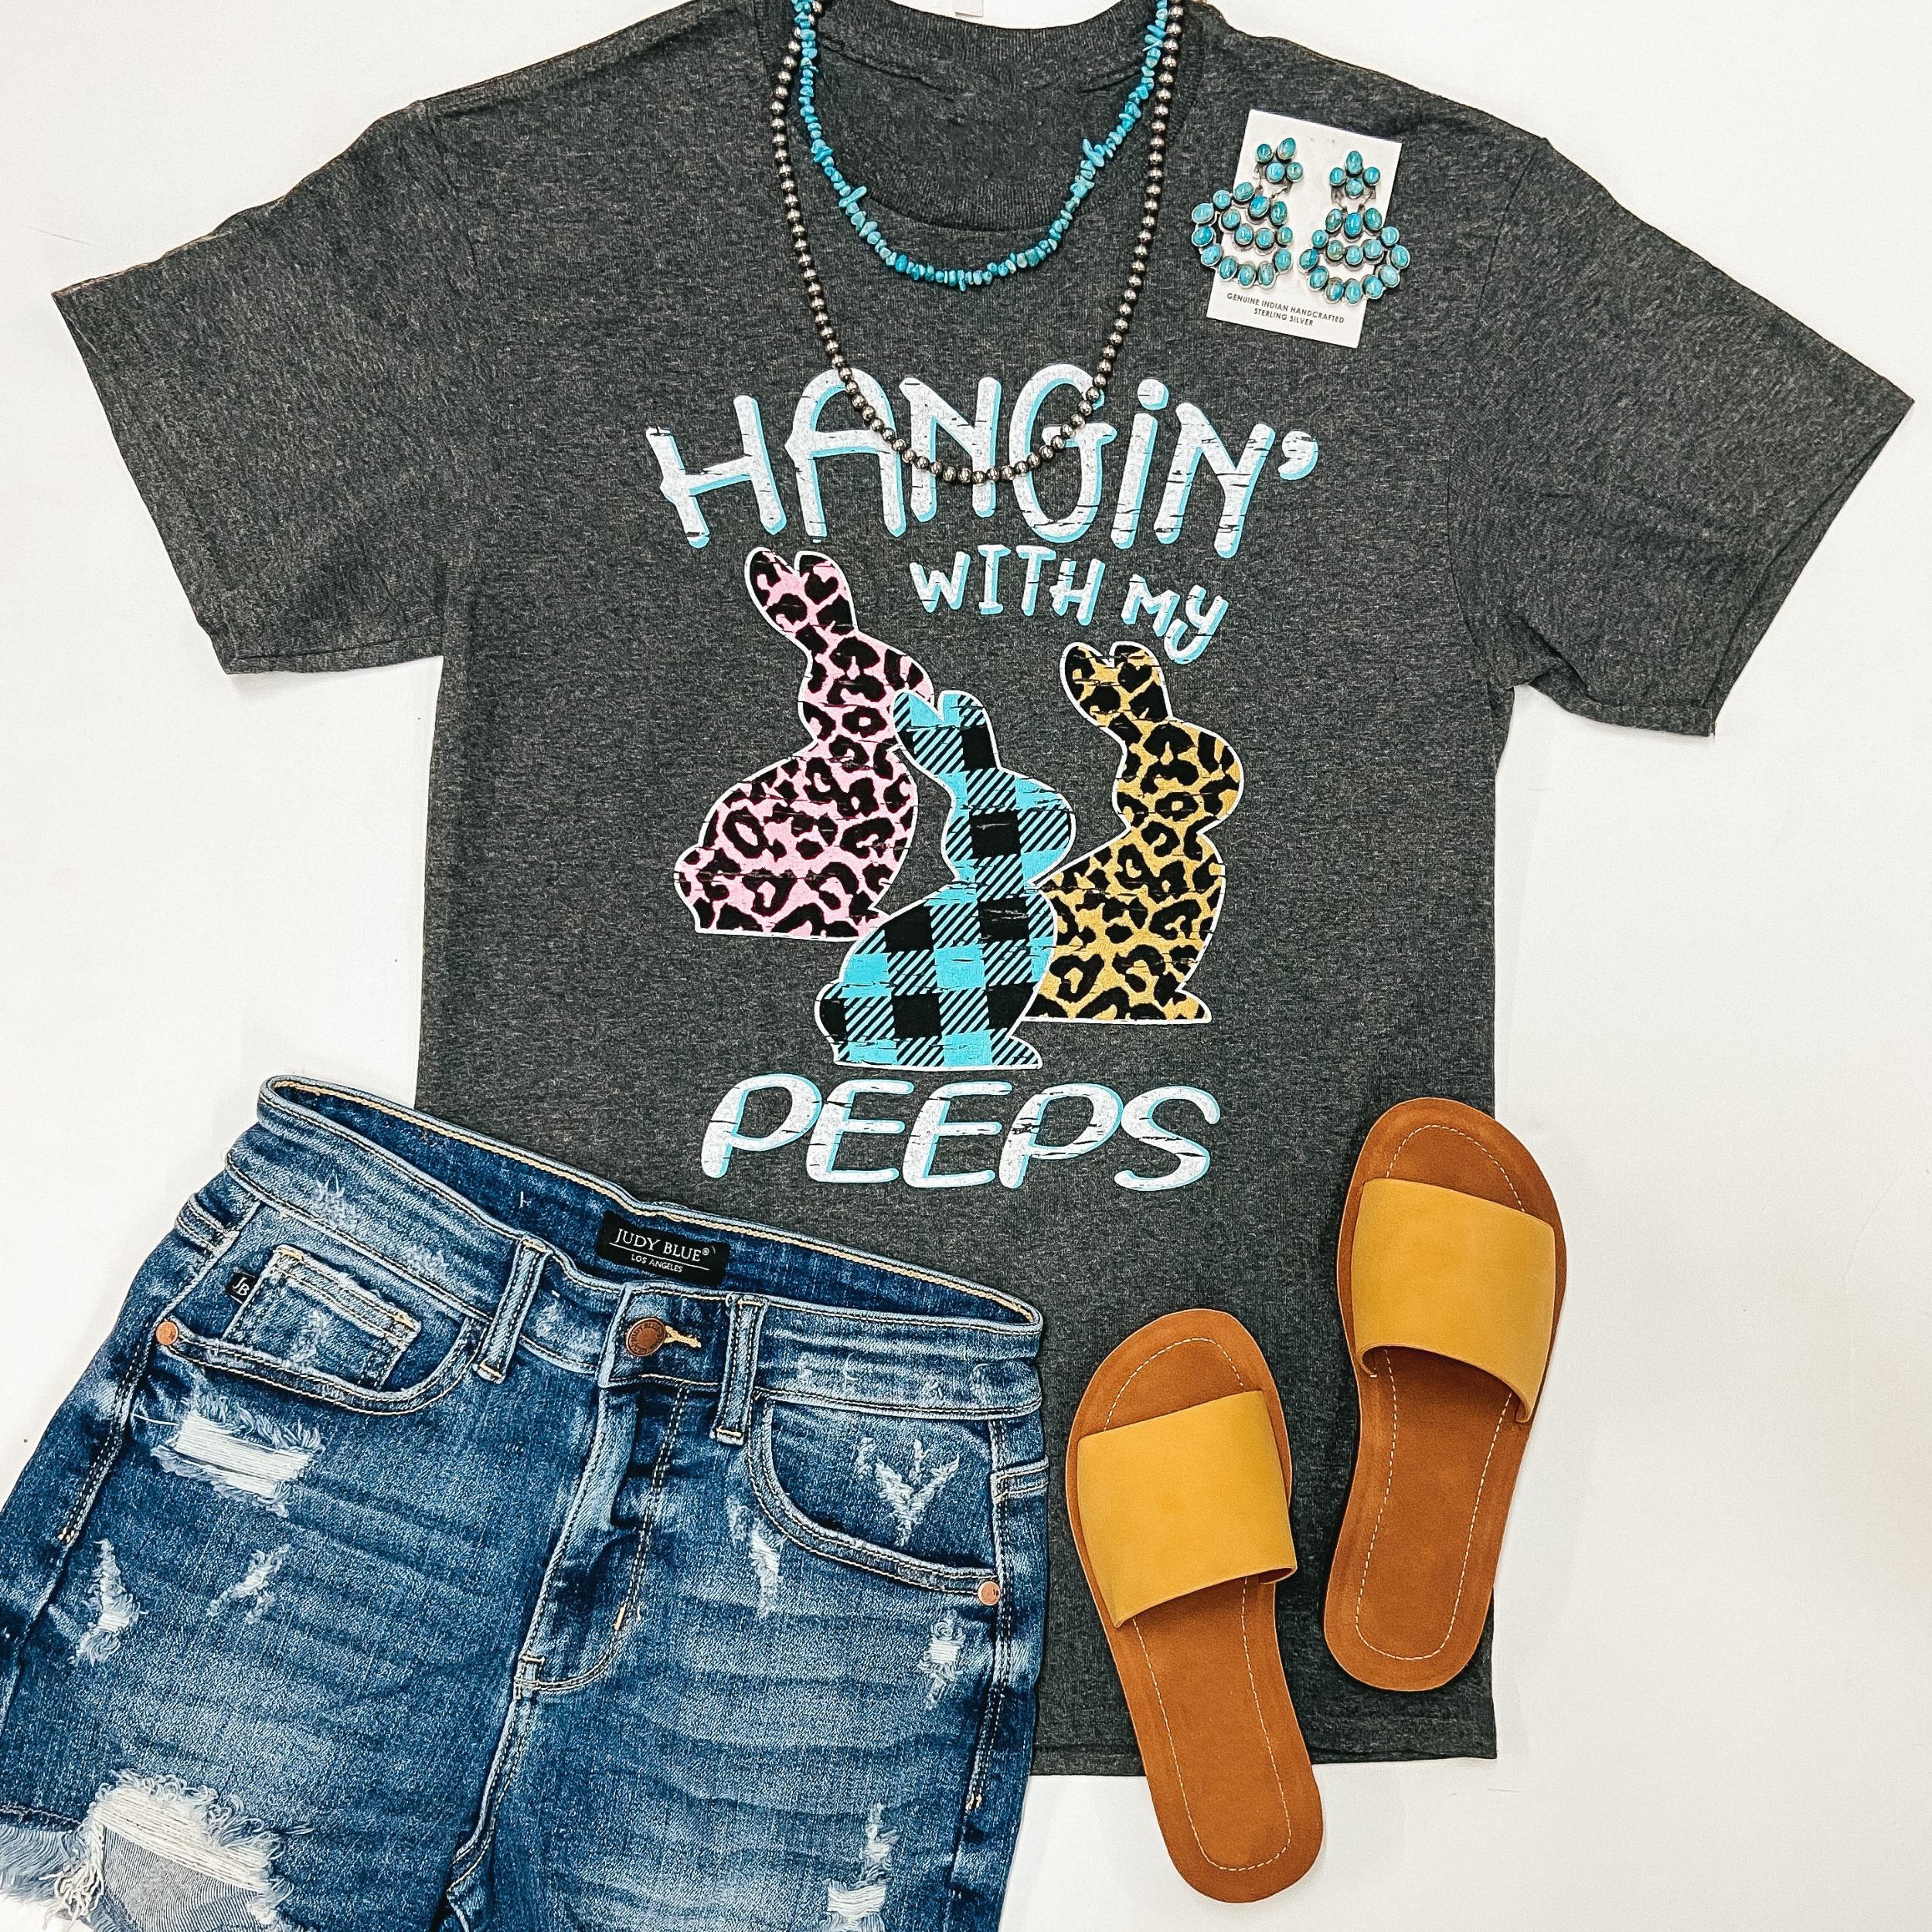 A charcoal grey tee shirt with cuffed sleeves and knotted hemline. The tee shirt has a graphic that says "Hangin' with my peeps." and three bunnies that are pink leopard print, blue buffalo plaid print, and yellow leopard print. Tee shirt is pictured on white background with denim shorts, a mustard yellow hat and sandals, and silver jewelry.